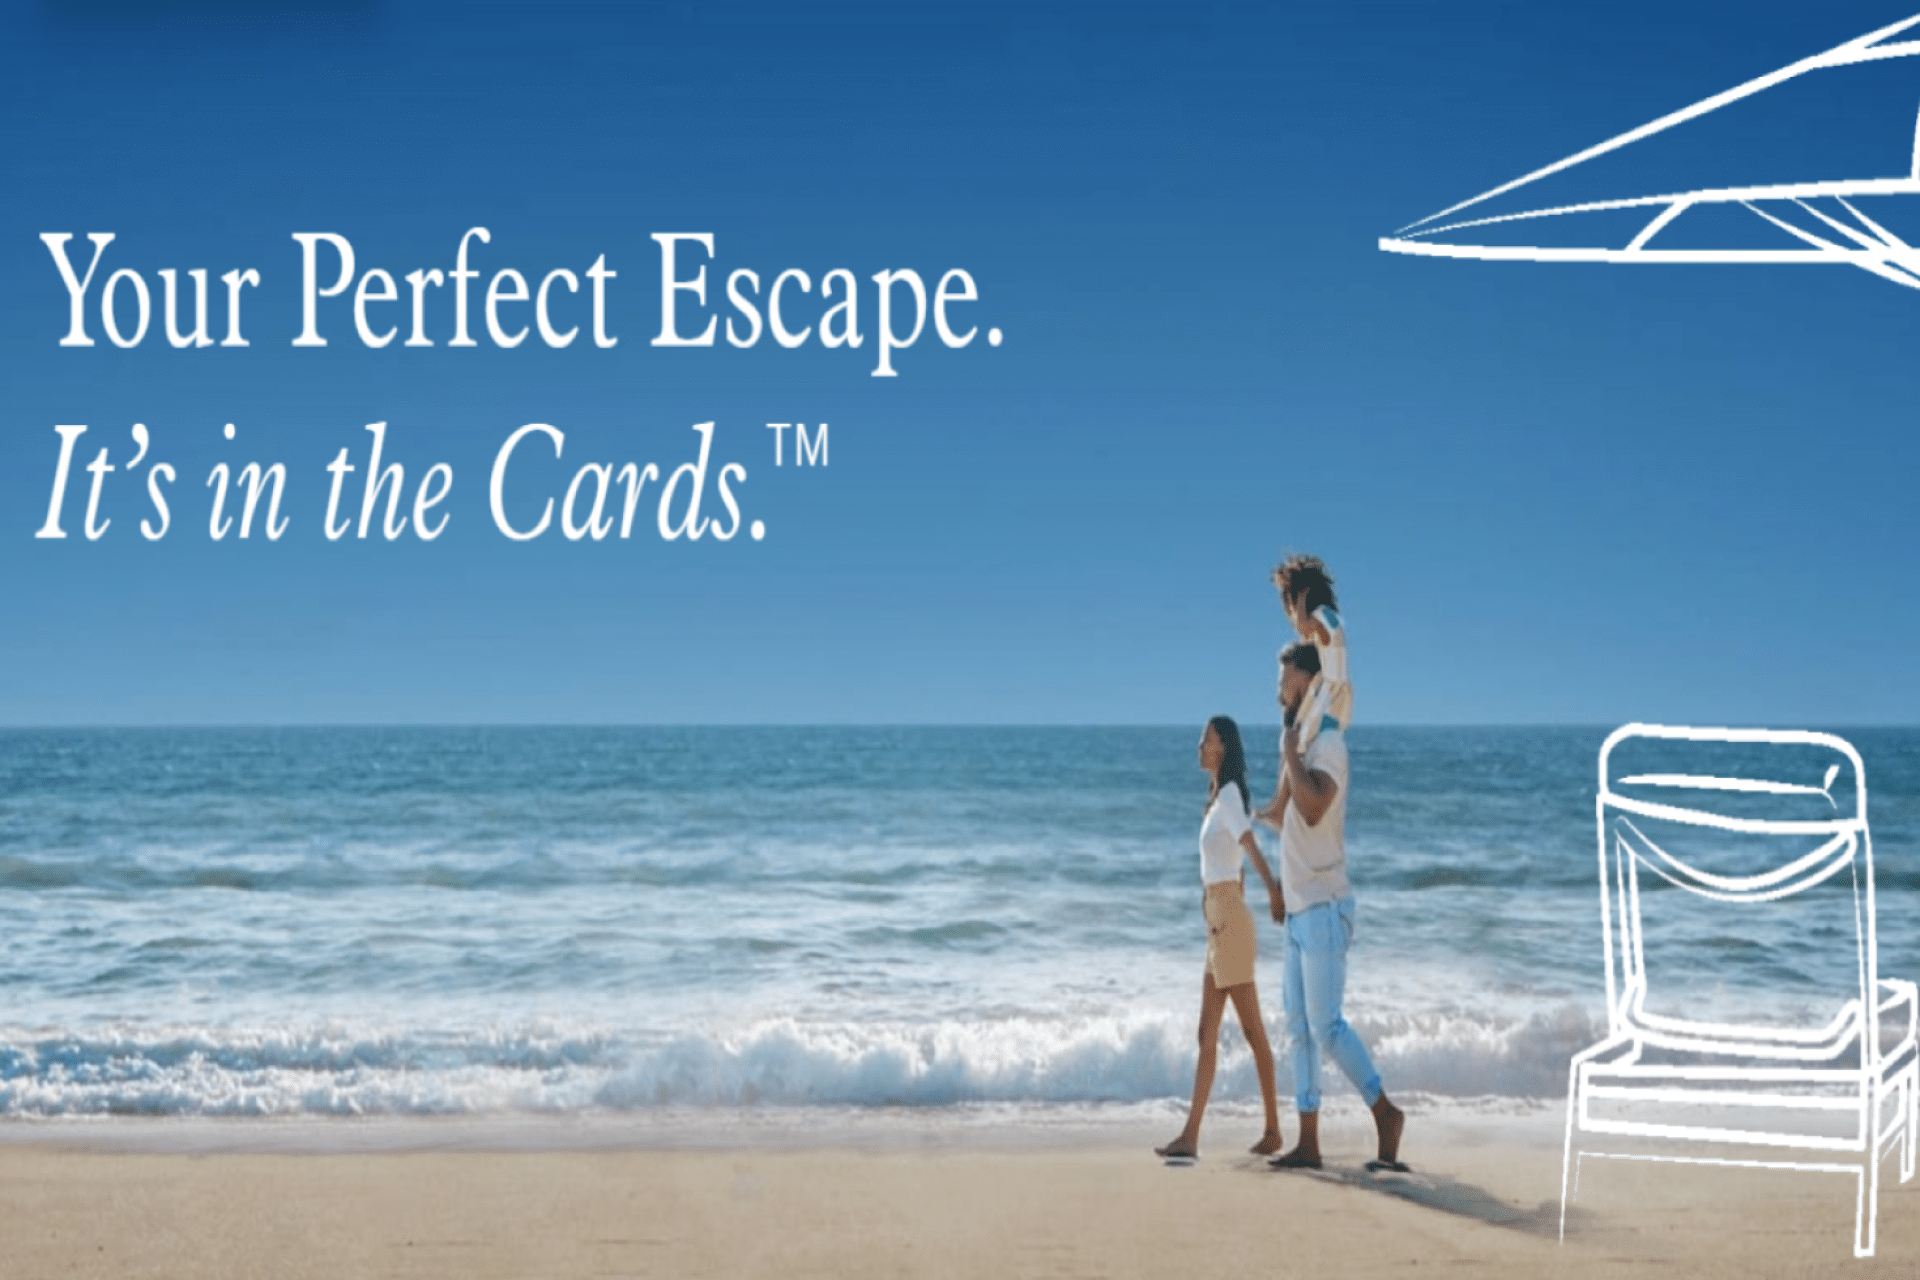 It’s in the Cards™ Promotion Showcases Value of Marriott Bonvoy Credit Cards